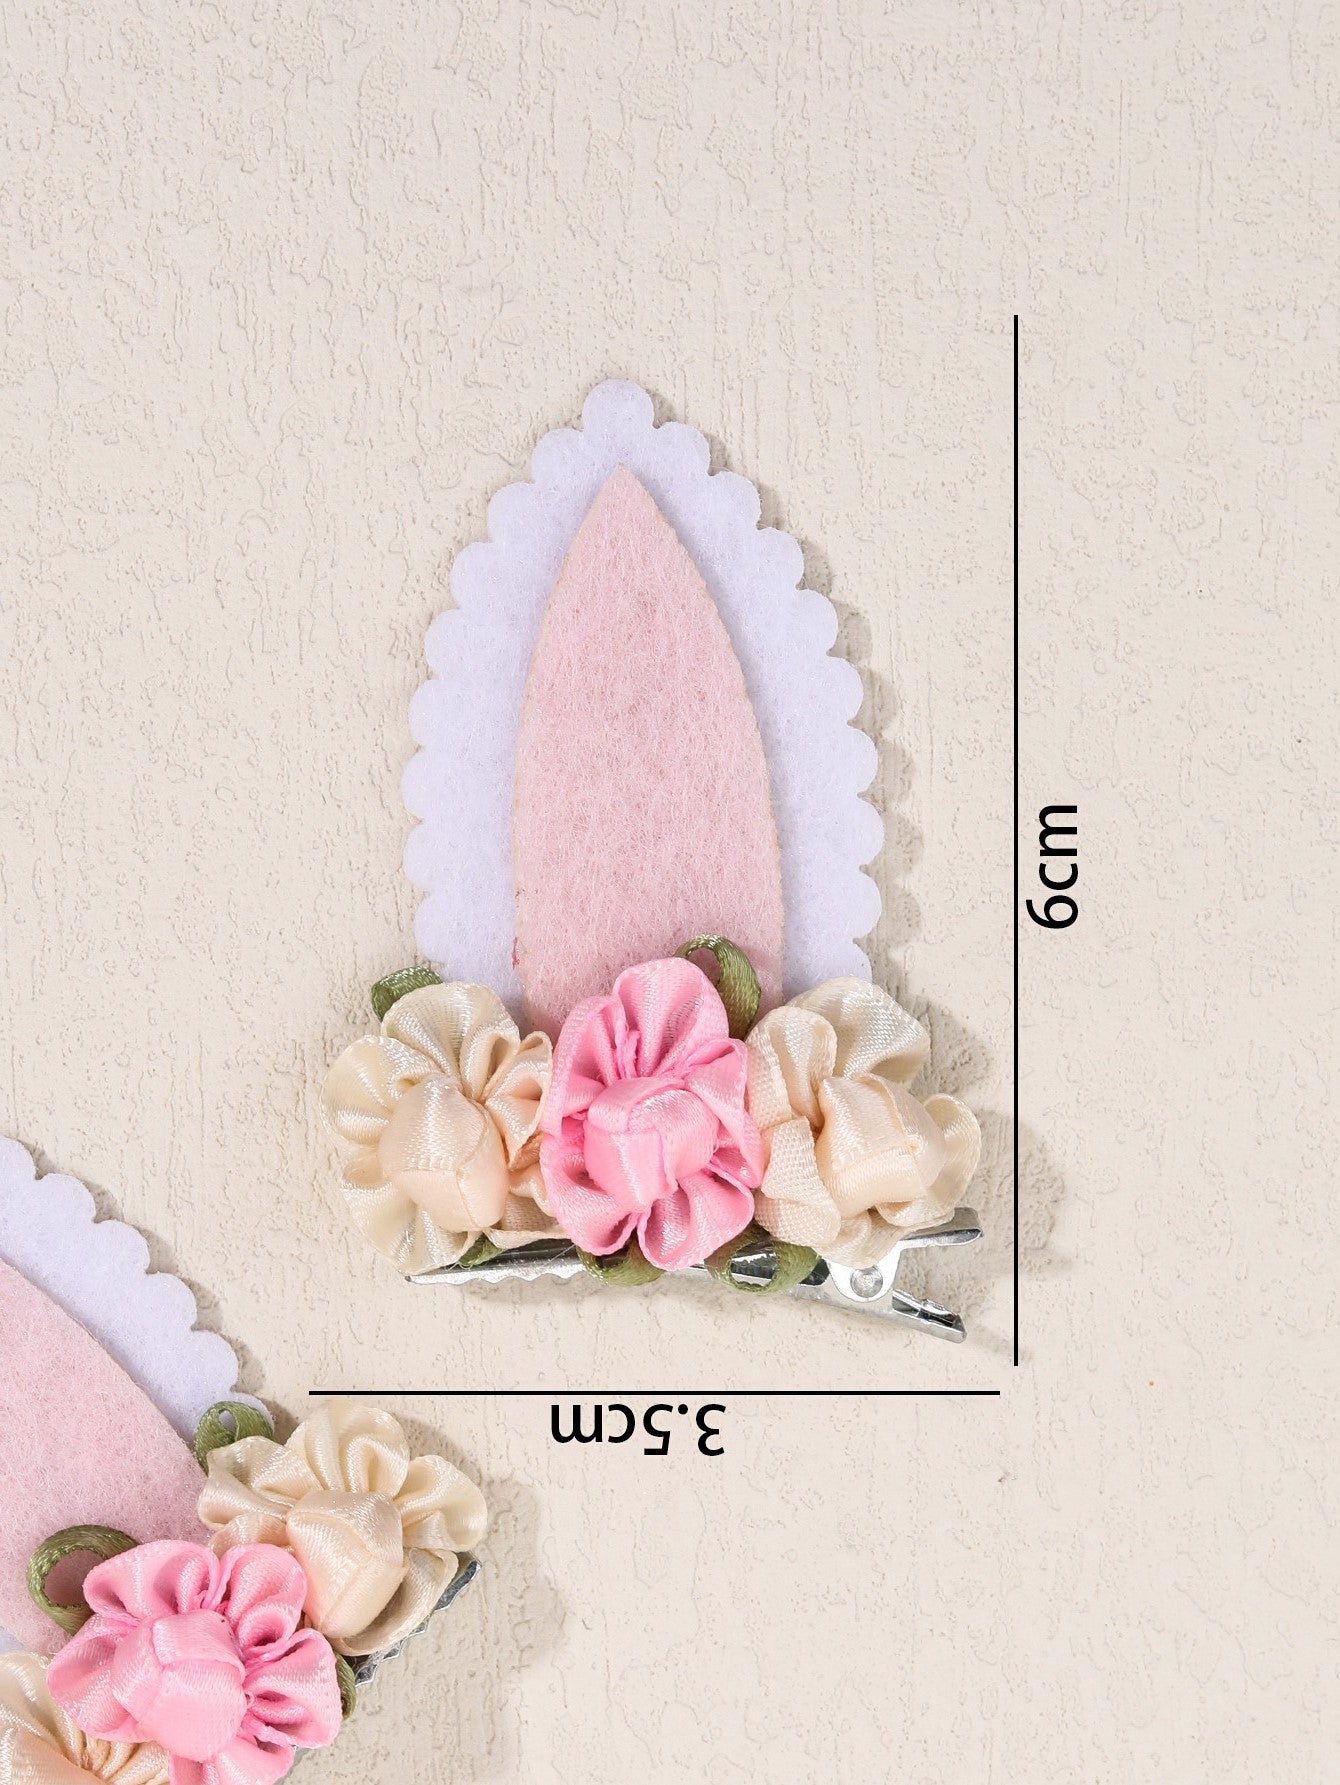 Pink Bunny Ear Easter Hair Clips for Girls